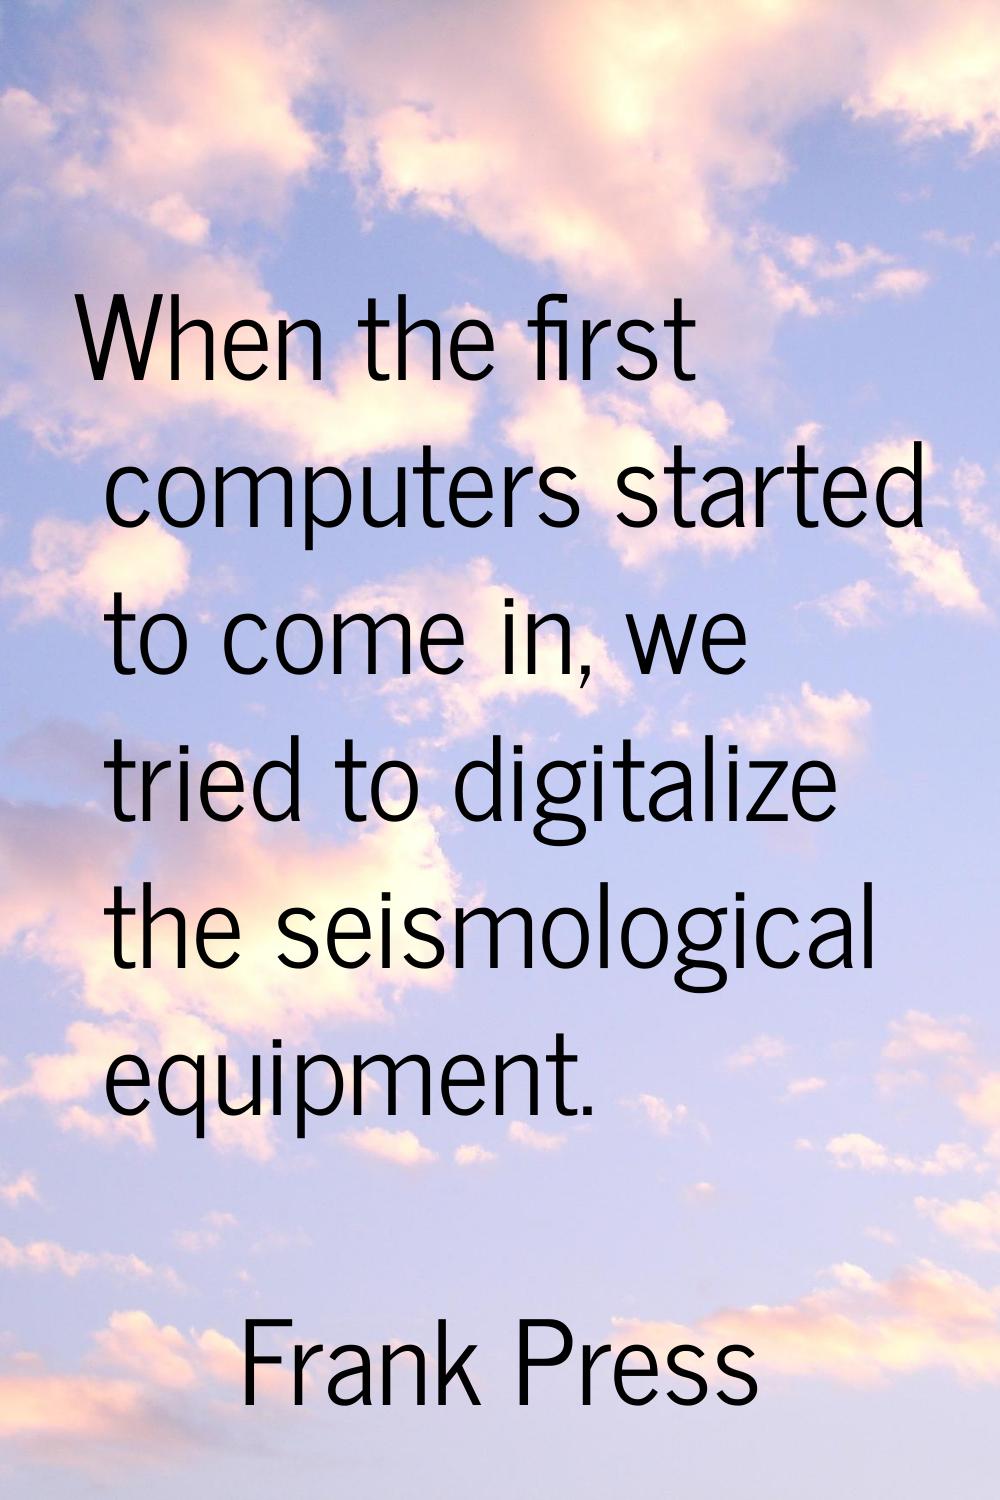 When the first computers started to come in, we tried to digitalize the seismological equipment.